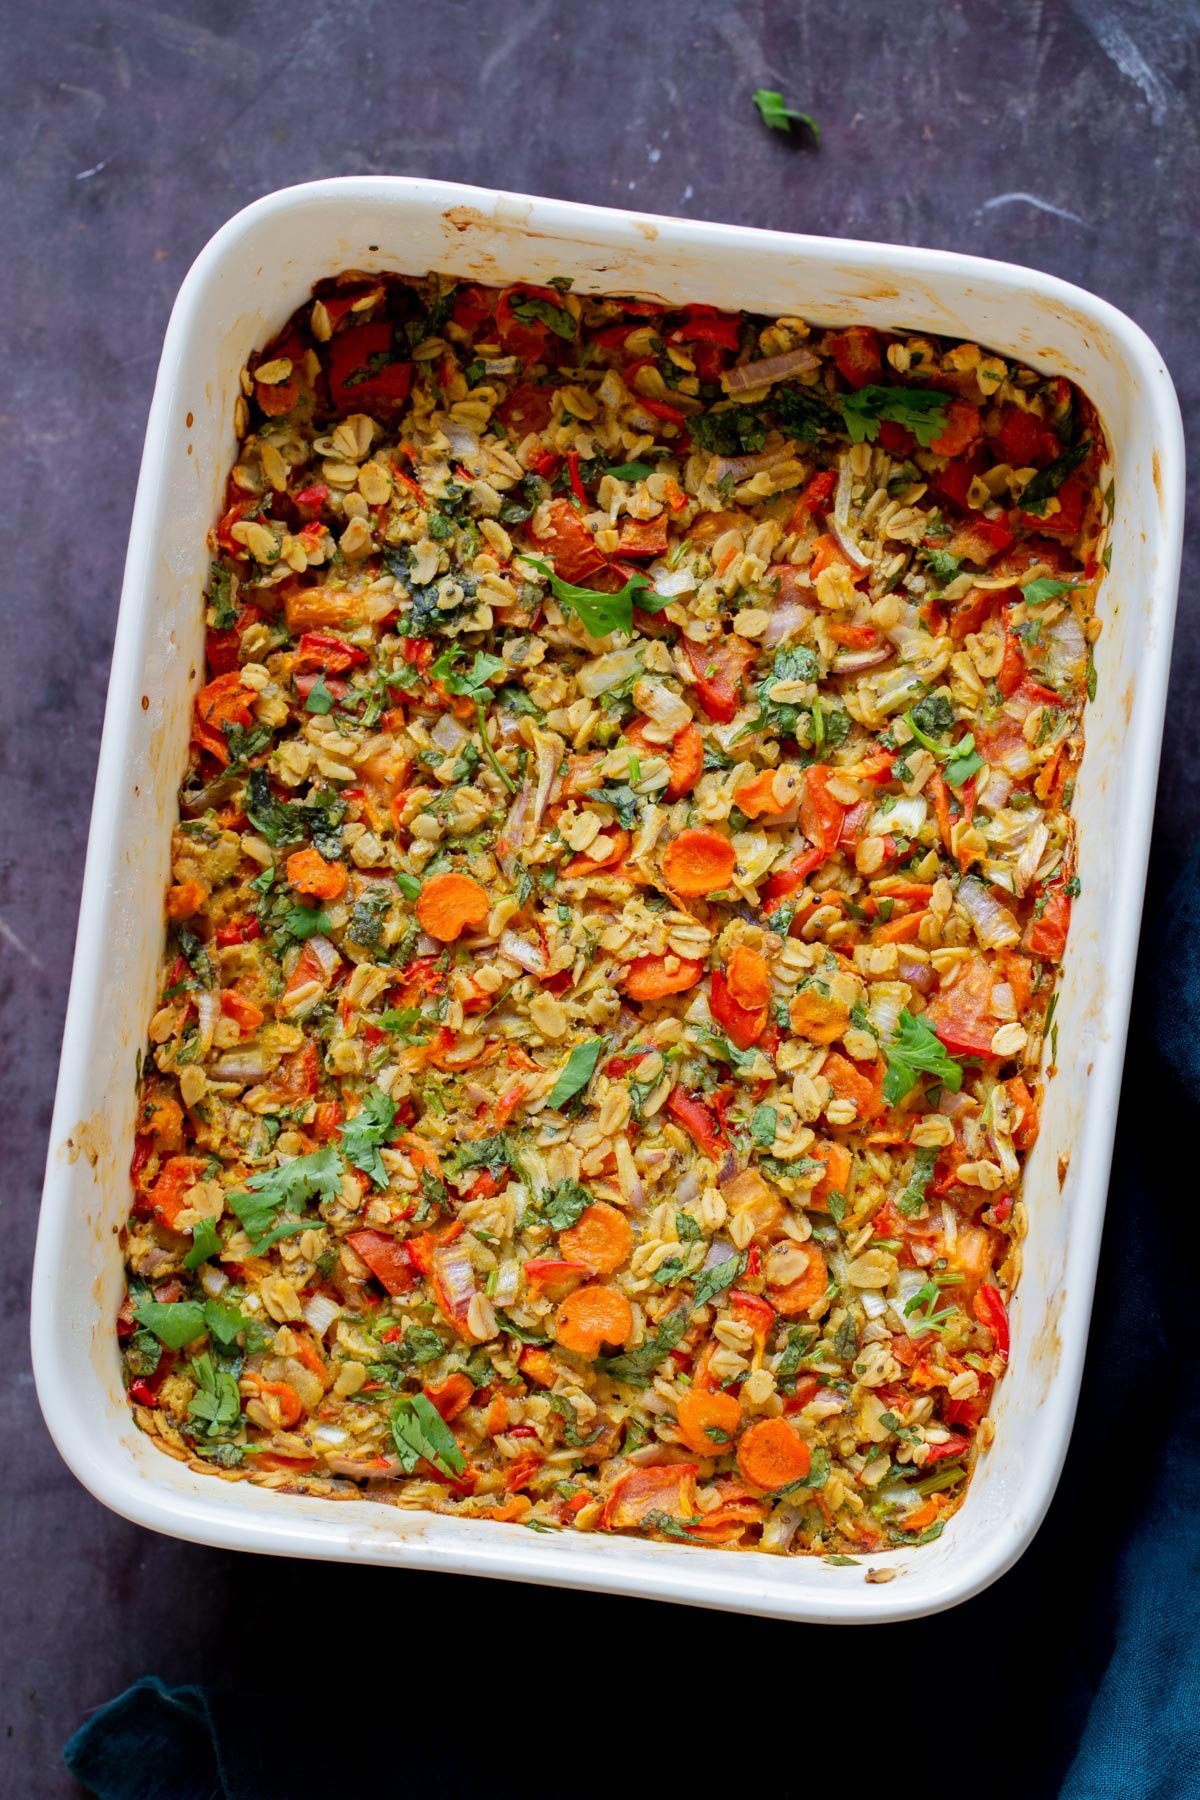 Spiced Savory Baked Oatmeal with veggies